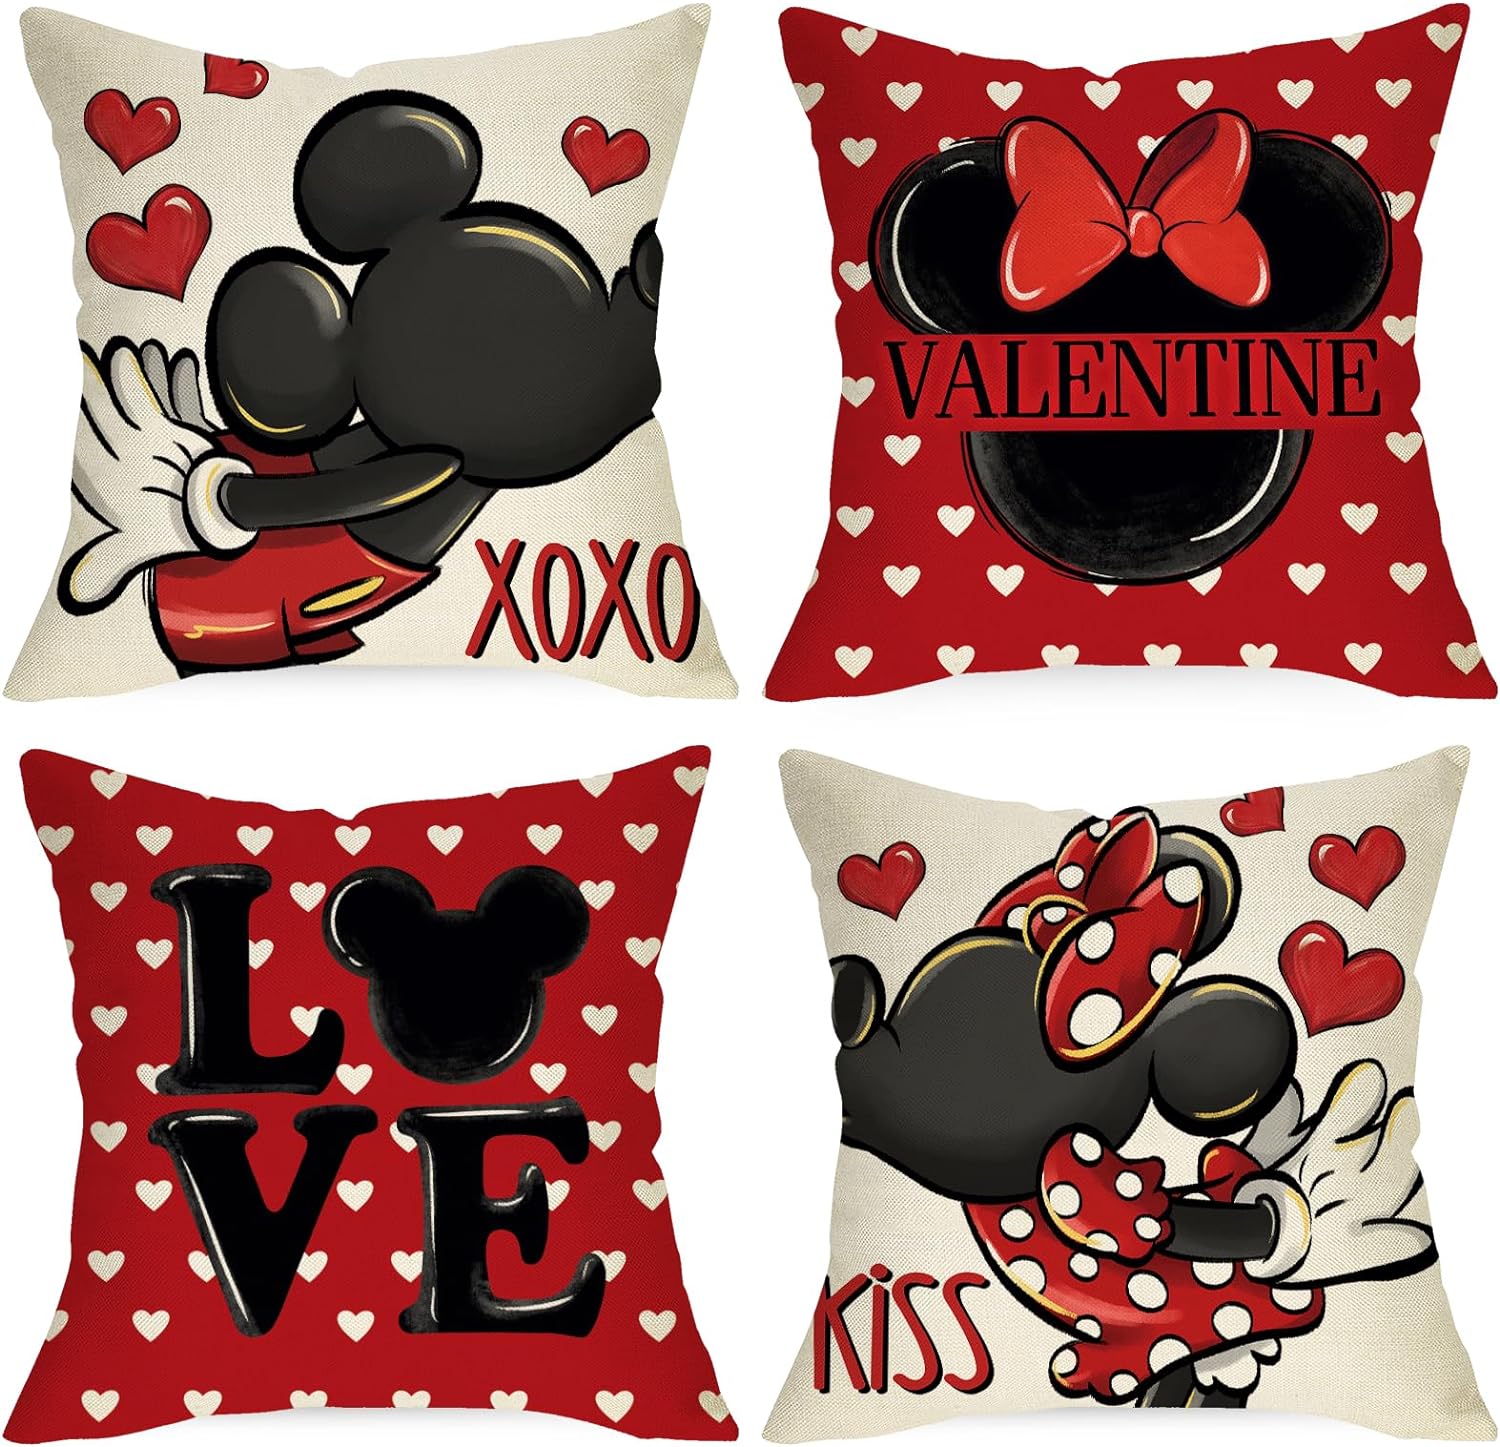 Valentine Cartoon Mouse Decorative Throw Pillow Covers 18 x 18 Set of 4, Red Love Heart Polka Dots Kiss Cushion Case Decor, Anniversary Wedding Holiday Home Decoration for Sofa